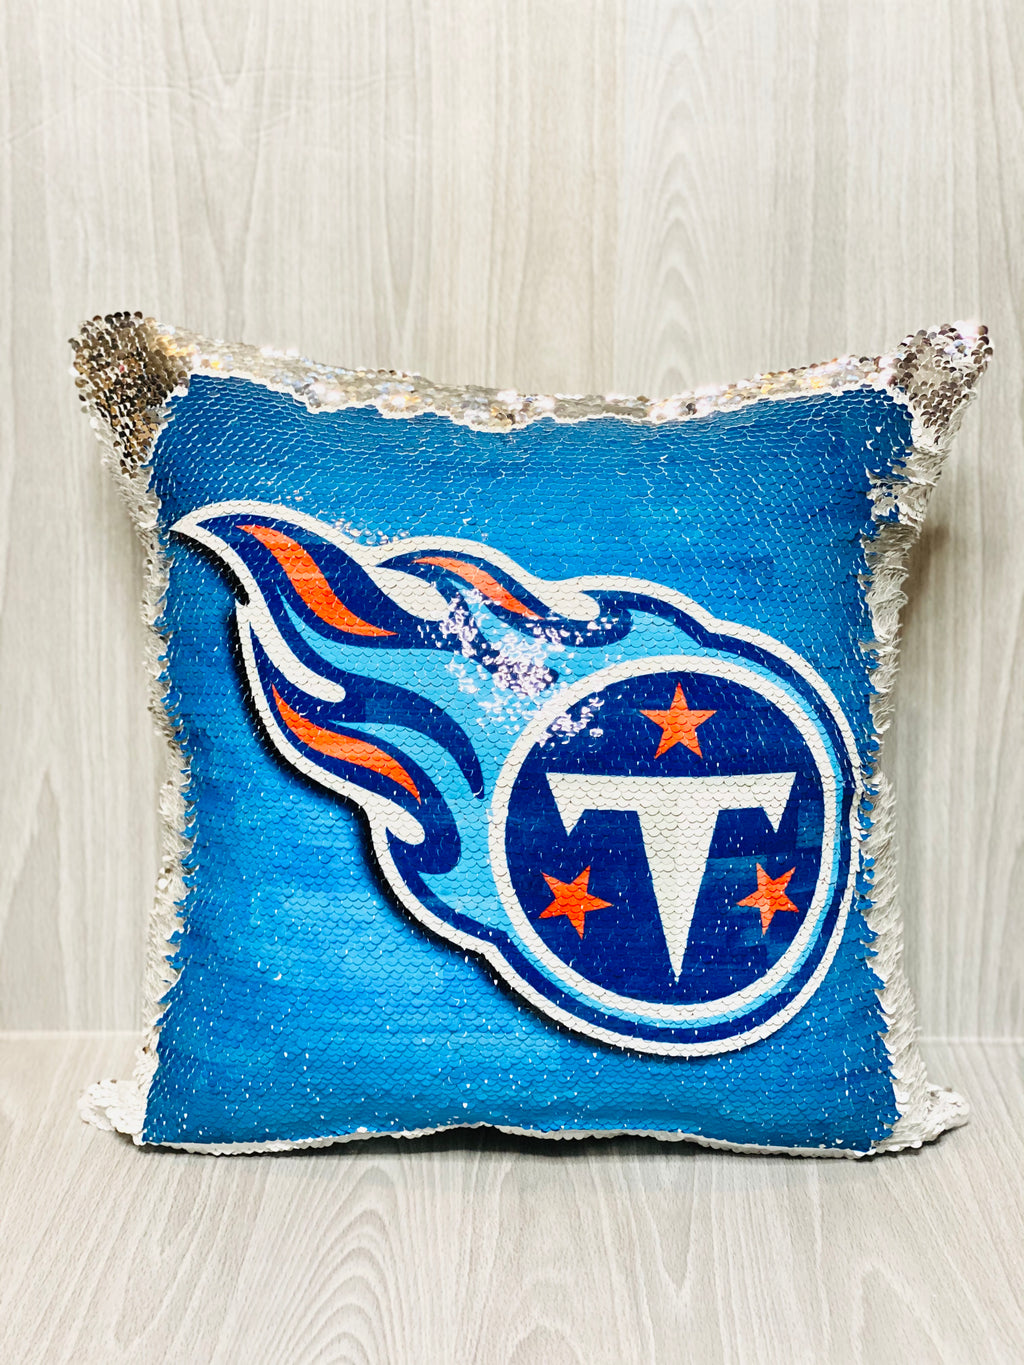 Customized Sports Team Reversible Sequin Pillows